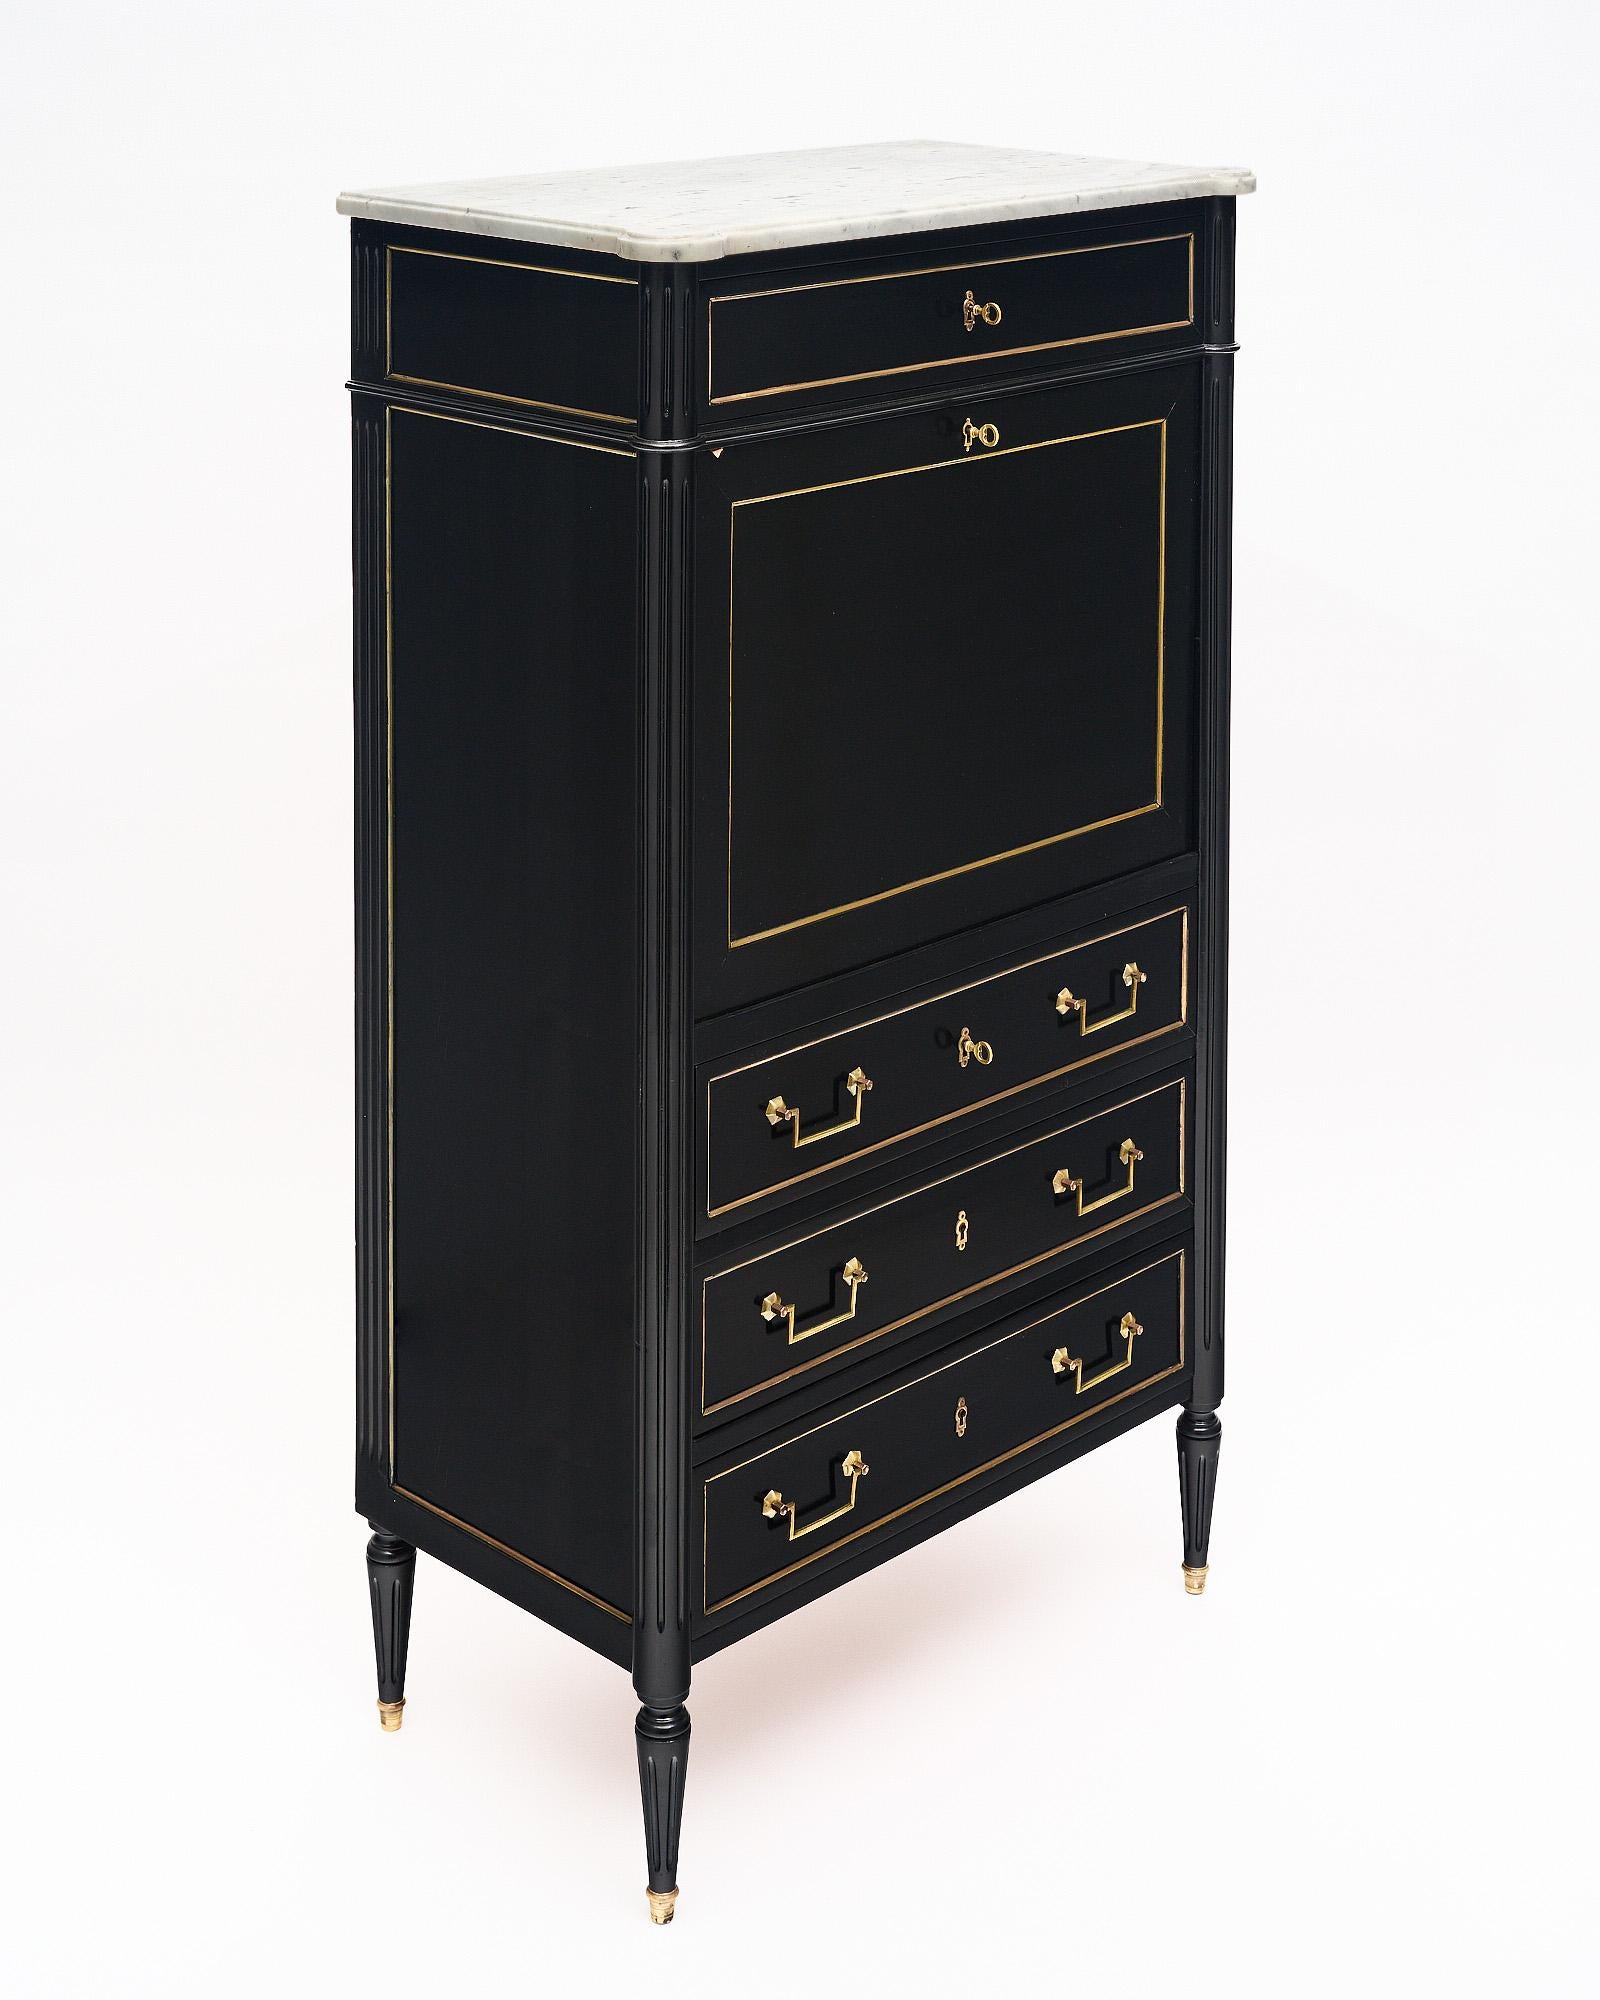 Secretary, drop front desk, French, in the Louis XVI style. This cabinet is finished in a lustrous museum quality ebonized French polish. There are four exterior dovetailed drawers with gilt brass trim and hardware throughout. The drop front is